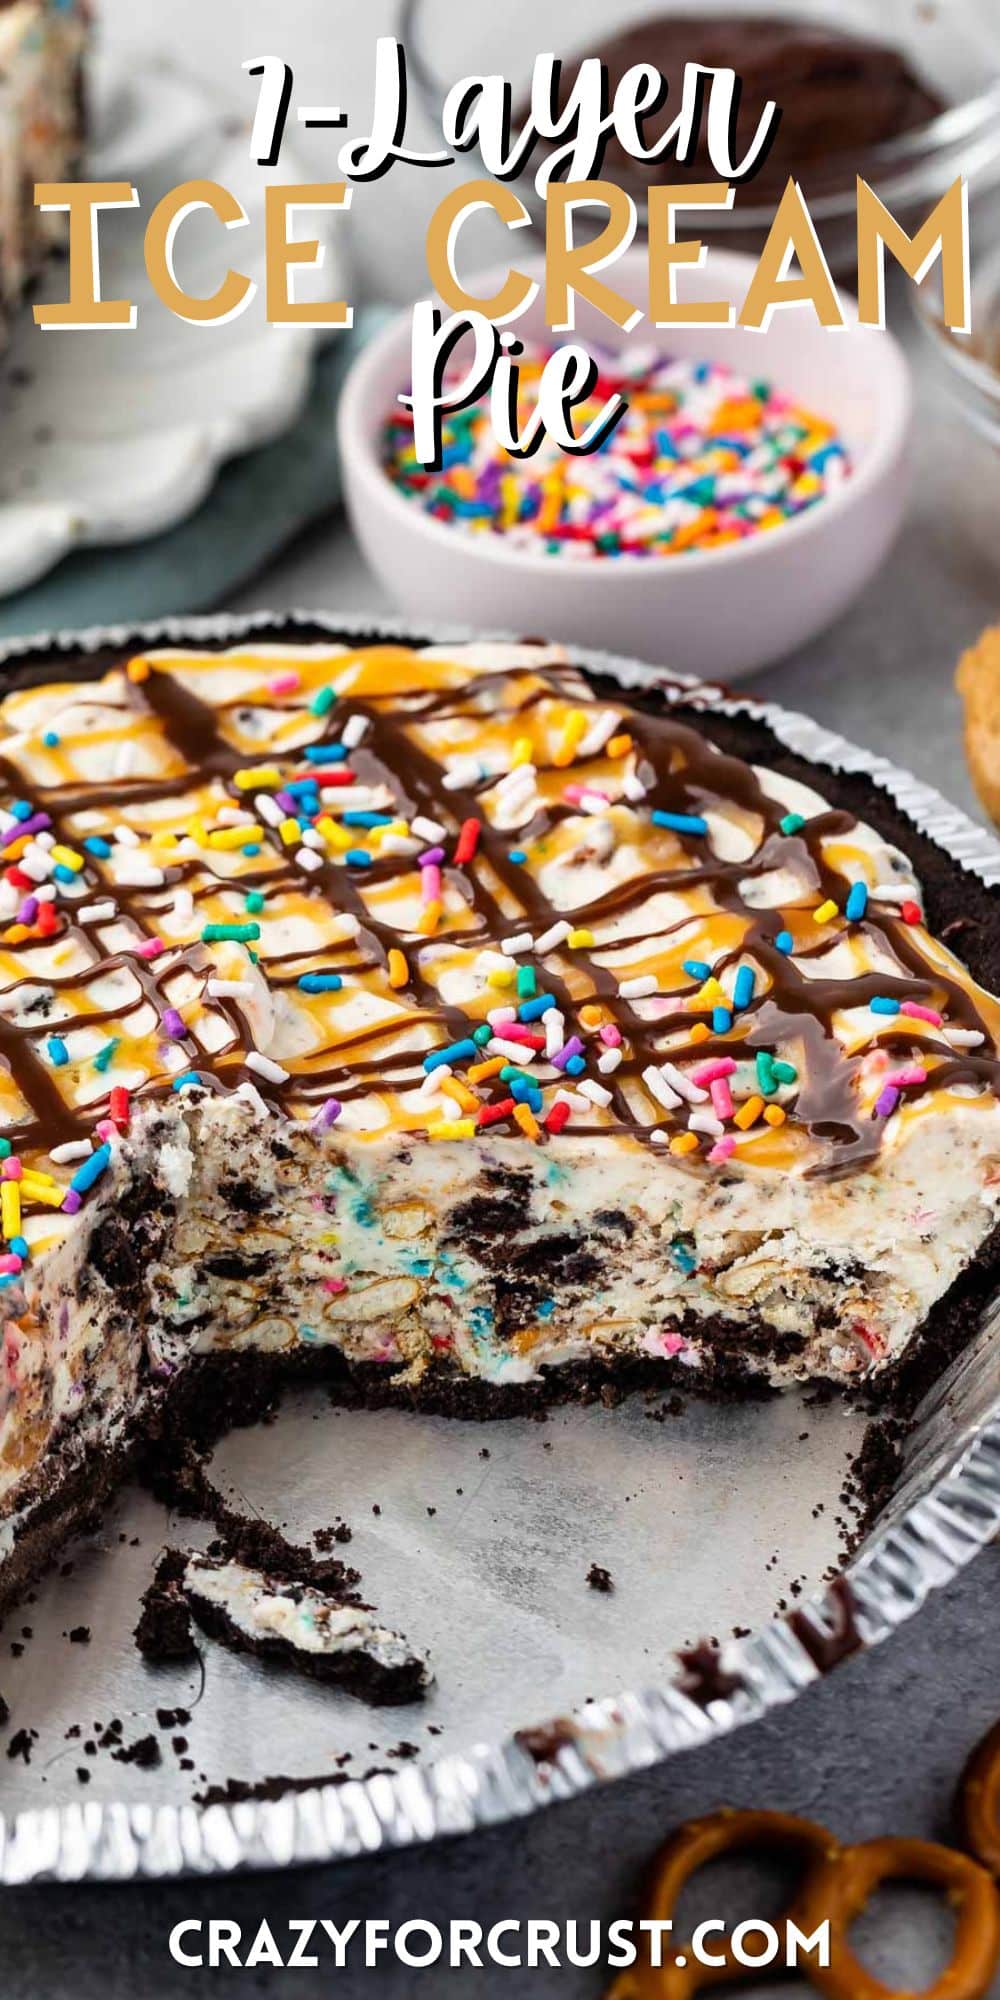 ice cream pie in a pie tin topped with chocolate and caramel sauce and sprinkles with words on the image.